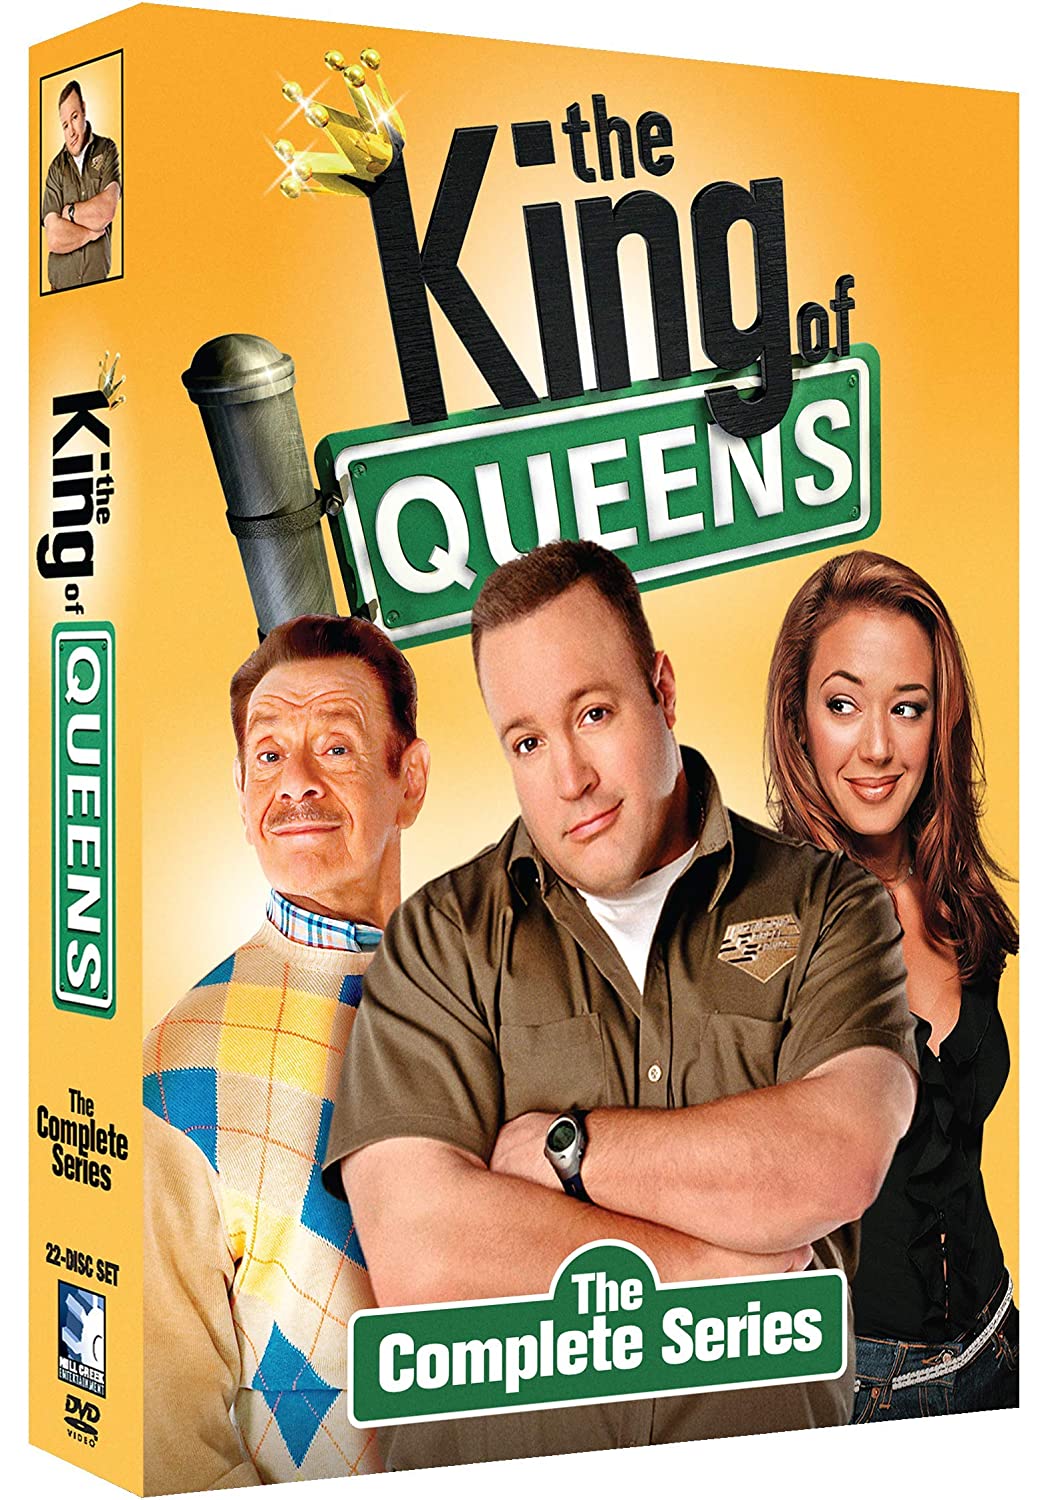 The King Of Queens: The Complete Series (DVD Set) - DVD [ 2018 ]  - Comedy Television On DVD - TV Shows On GRUV